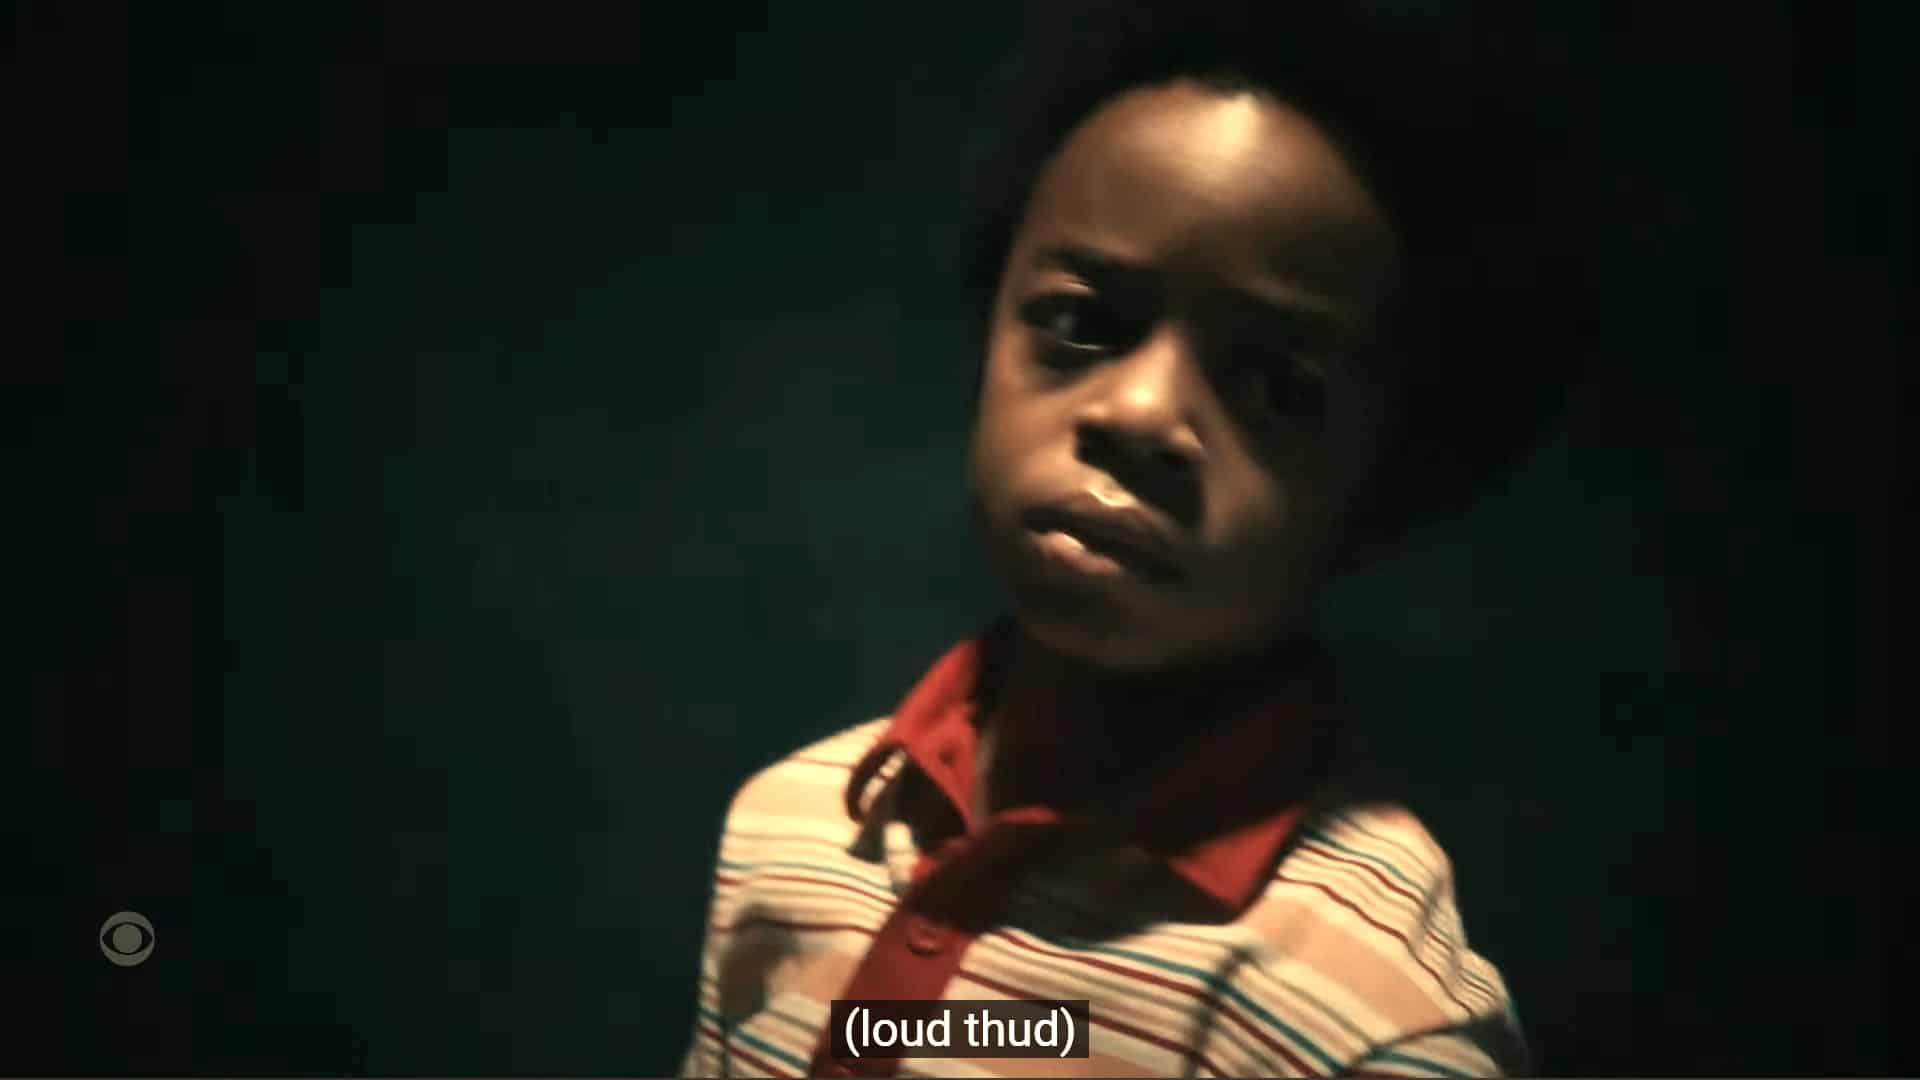 8 Year Old Dante (Jelani Dacres) experiencing his father's anger